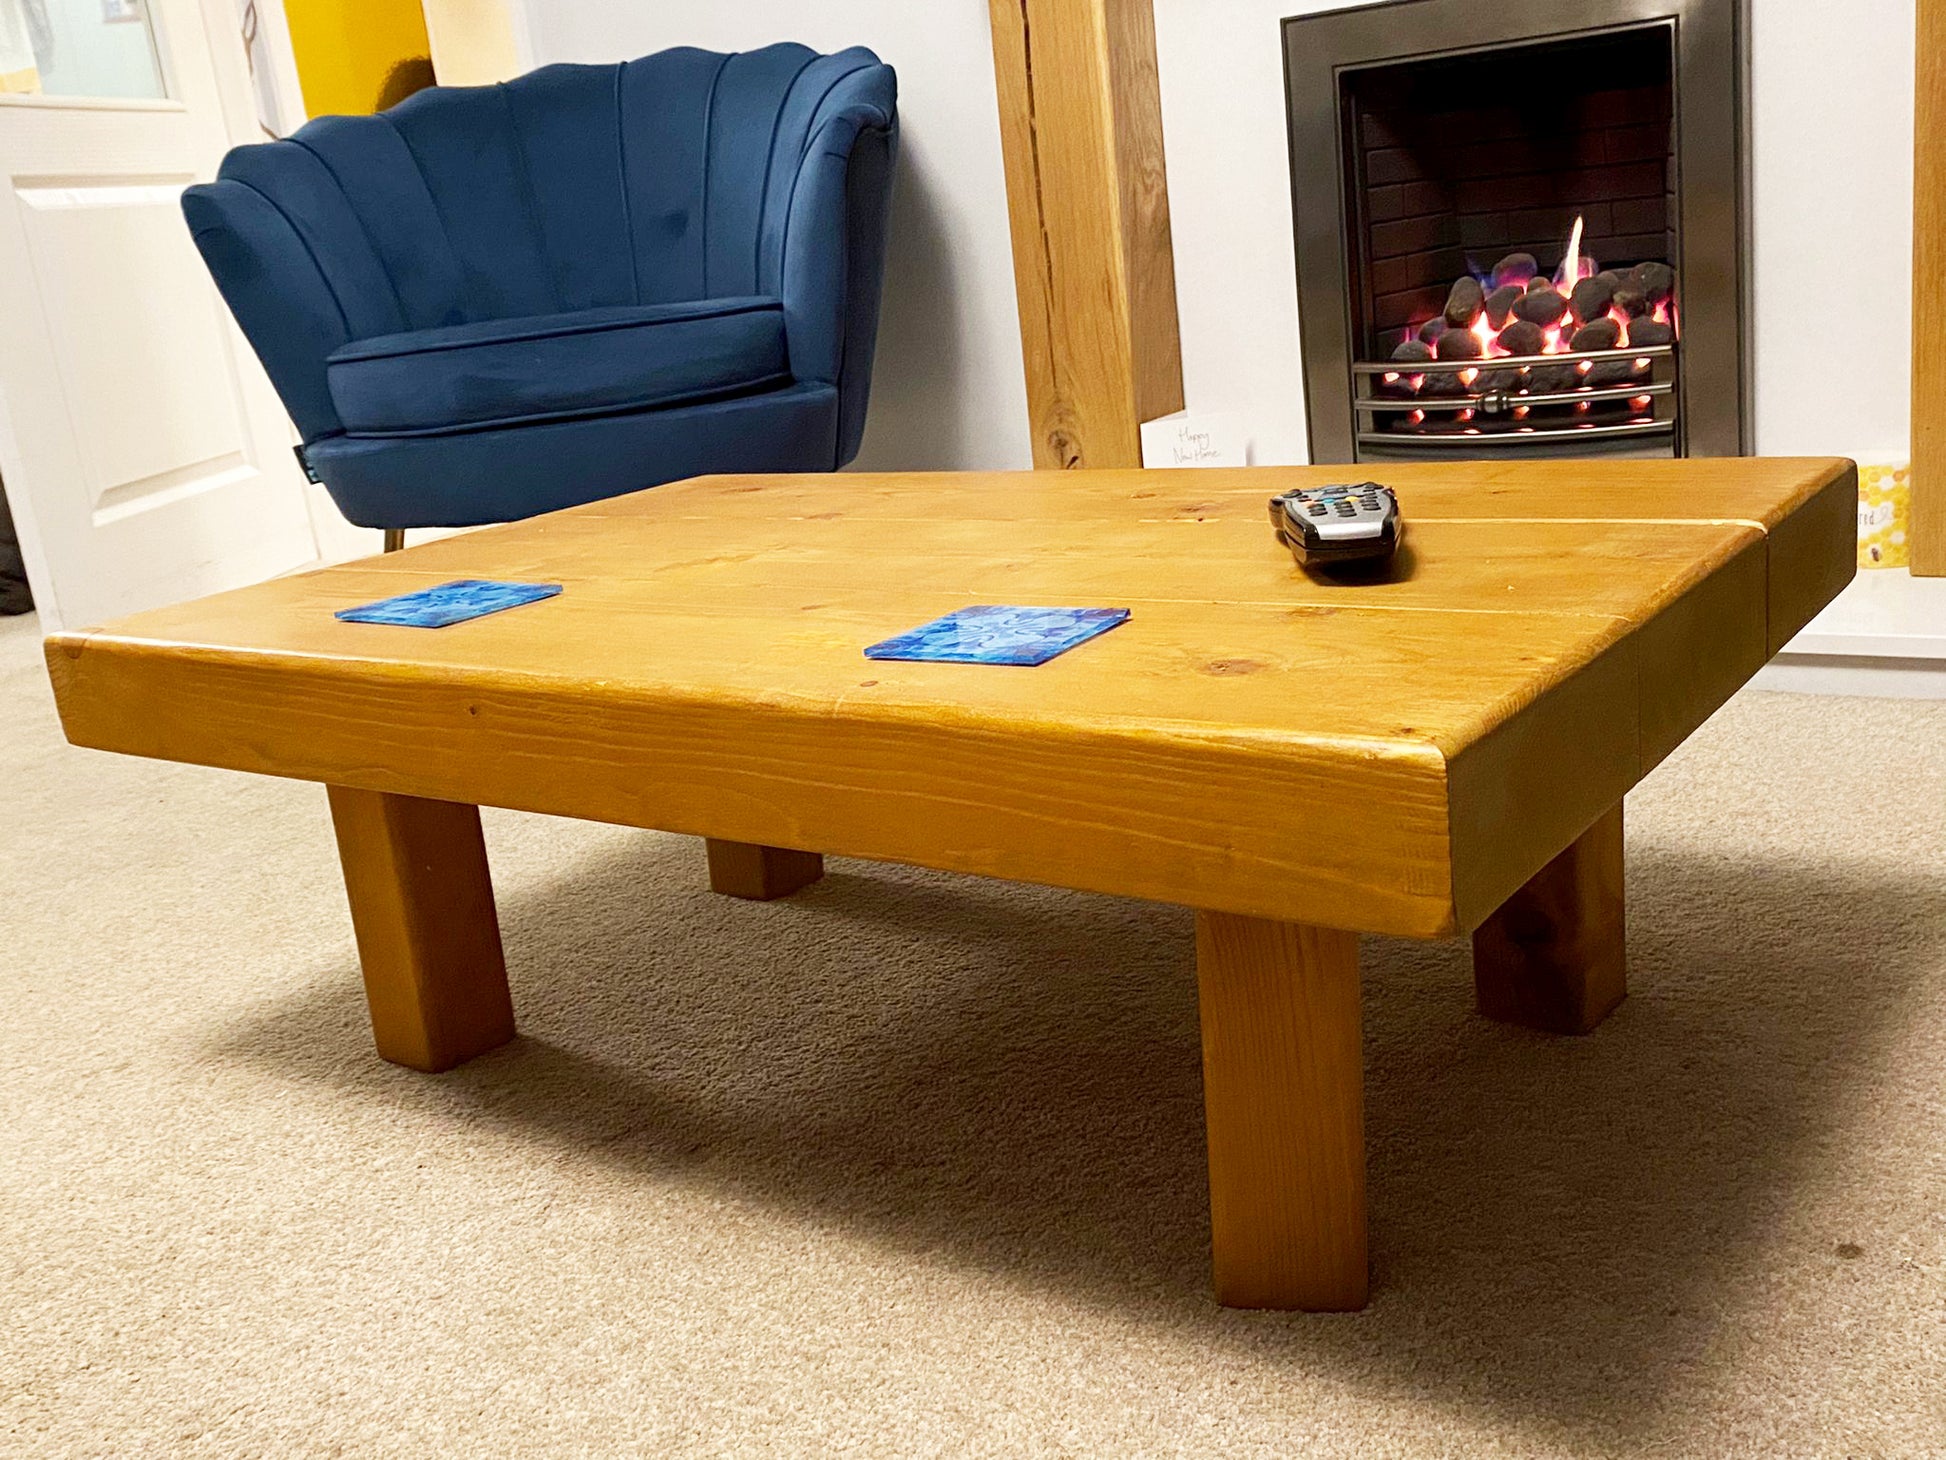 Said woods coffee table, couch table farmhouse style